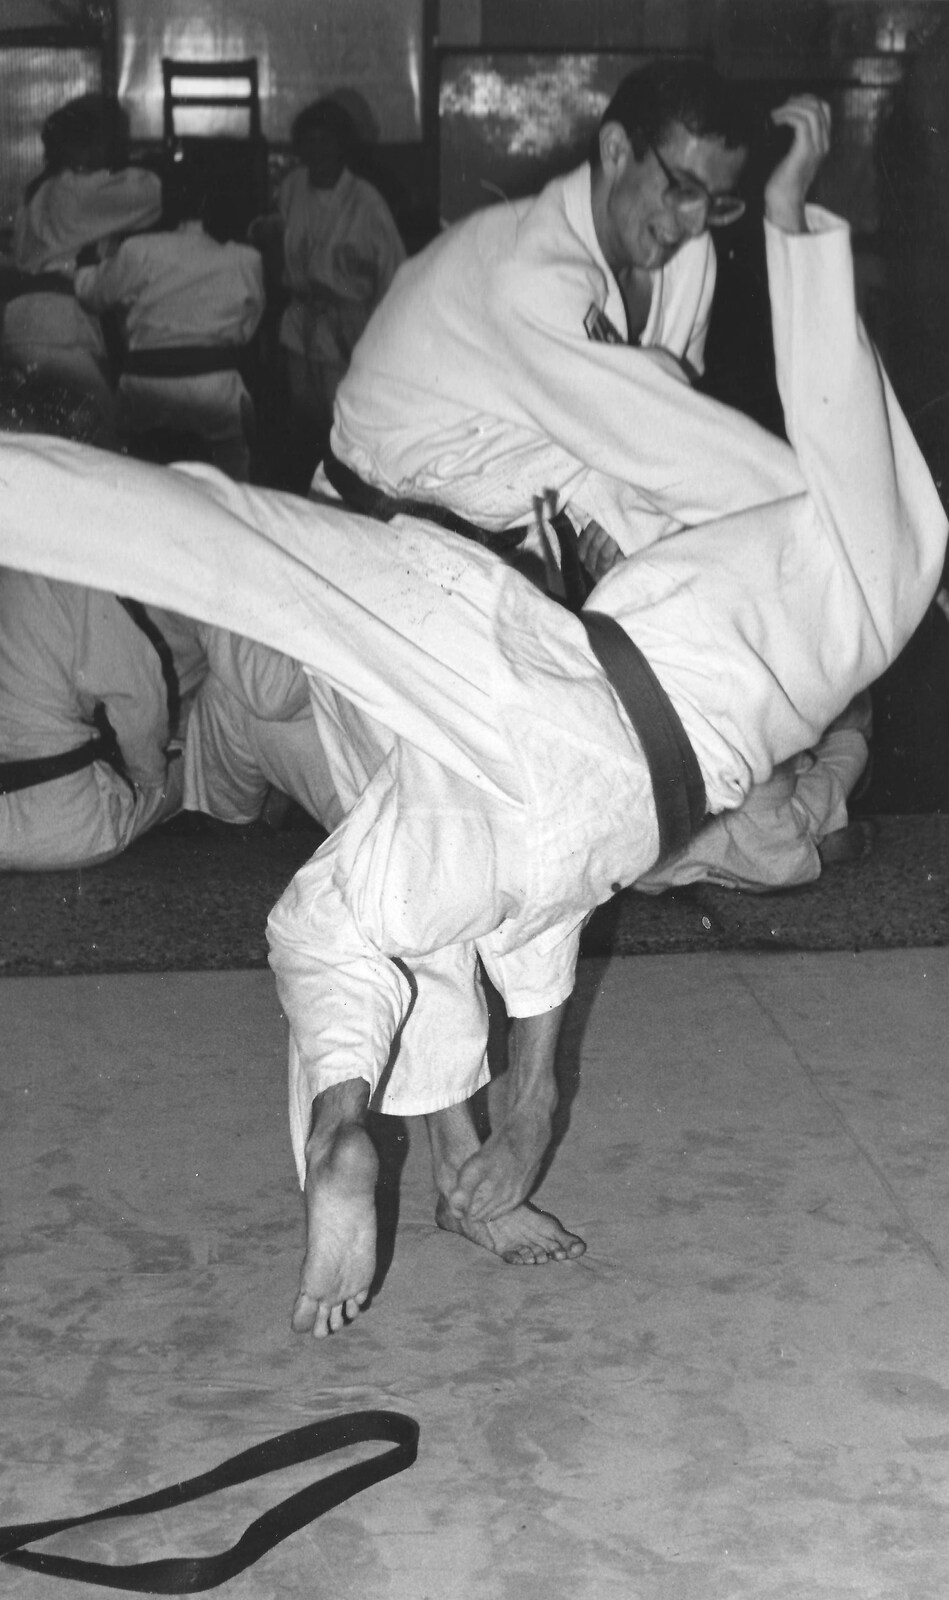 More Jitsu action from Dobbs from Uni: The Second Year in Black and White, Plymouth Polytehnic, Devon - 8th March 1987